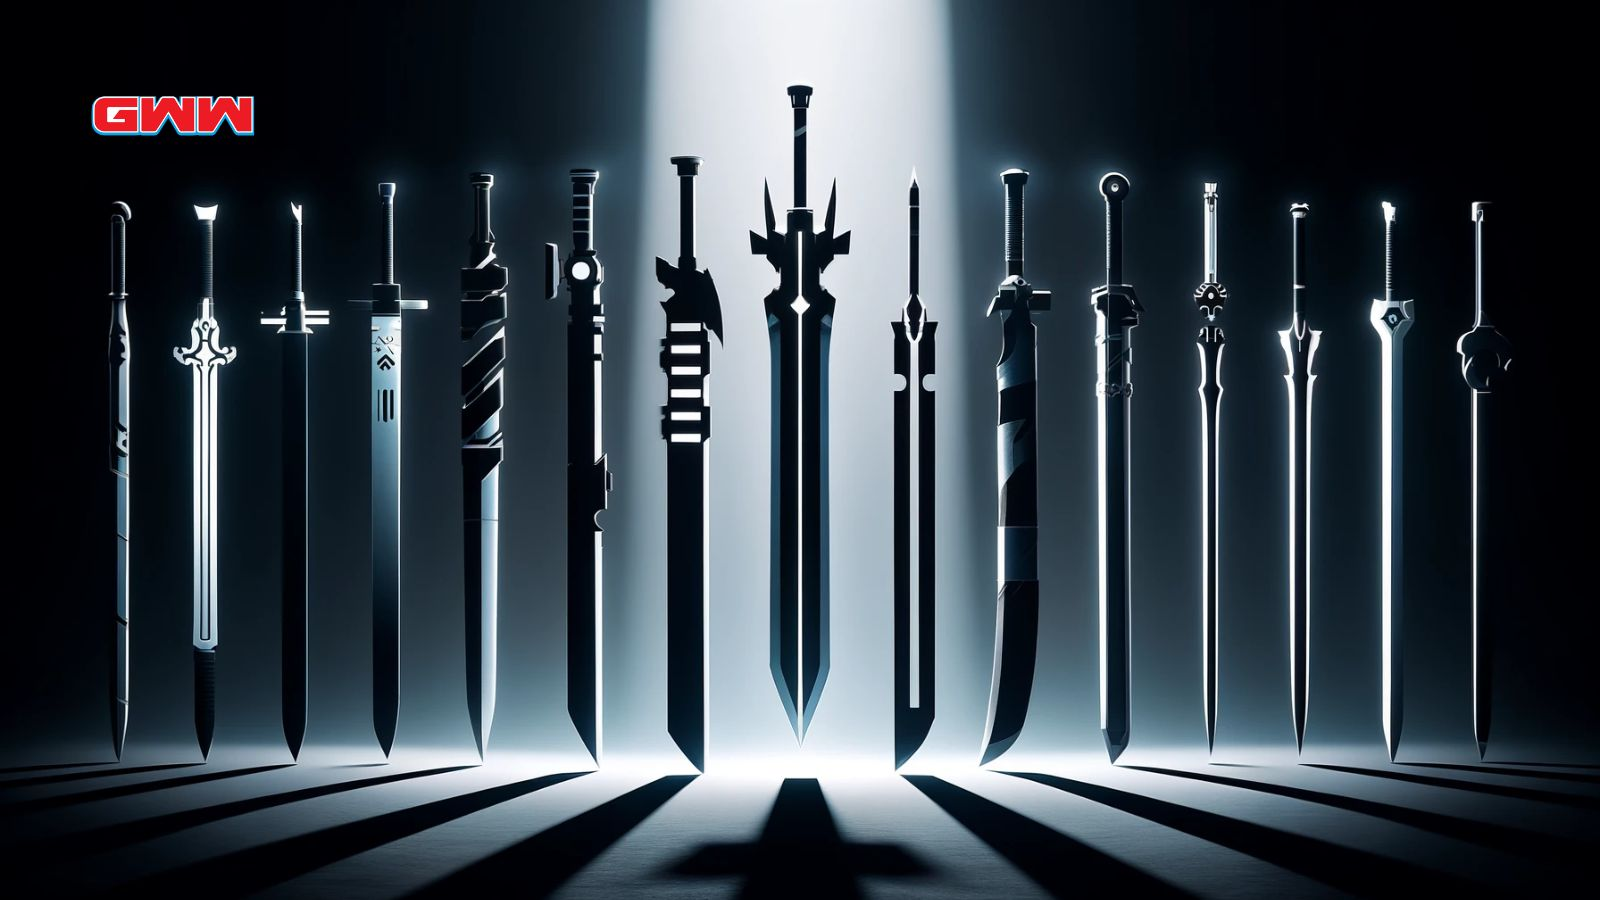 Lineup of anime swords highlighted with dramatic lighting